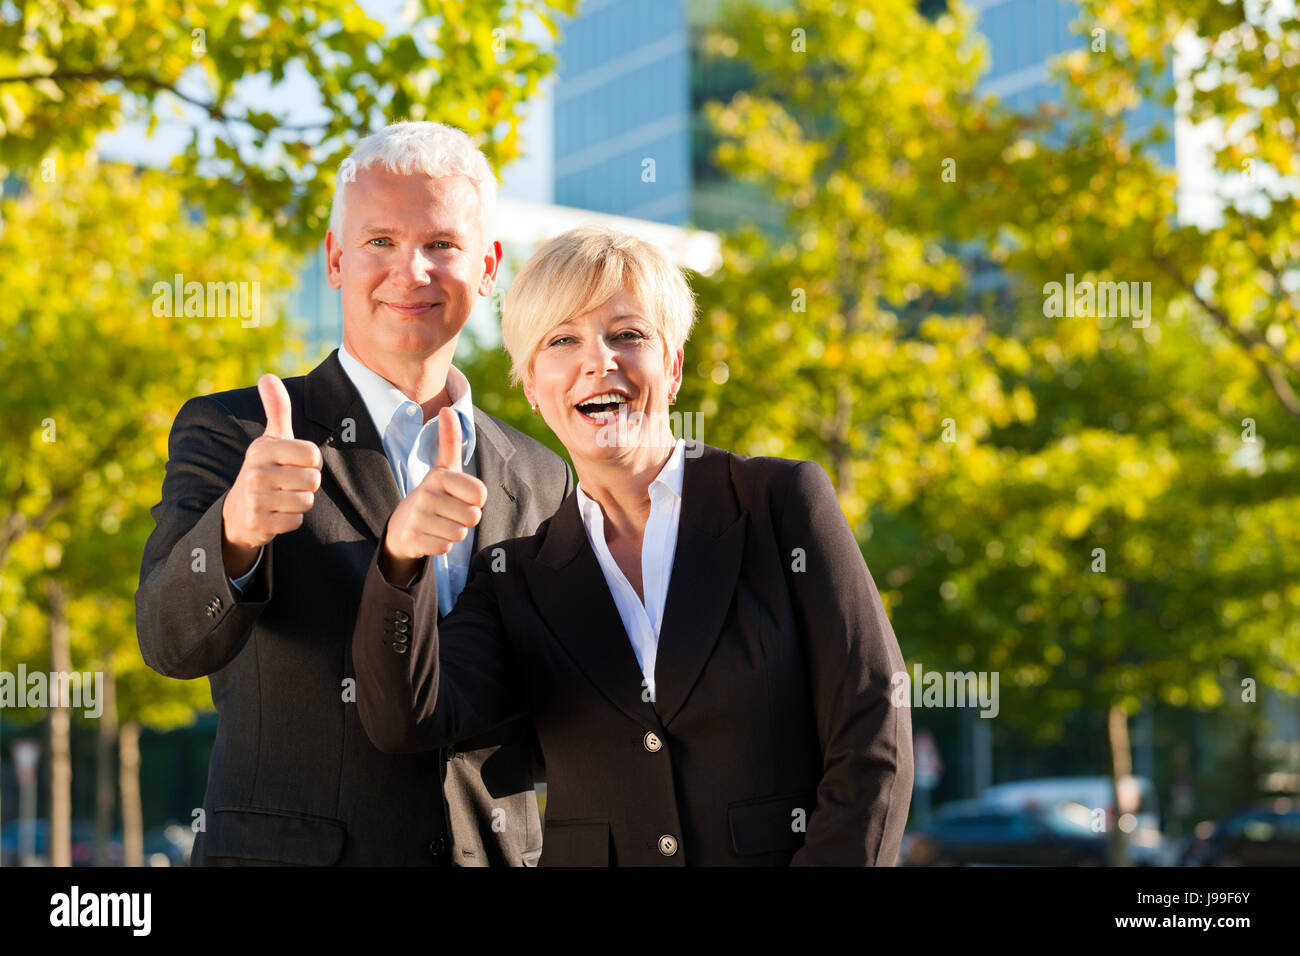 business people in a park outdoors Stock Photo